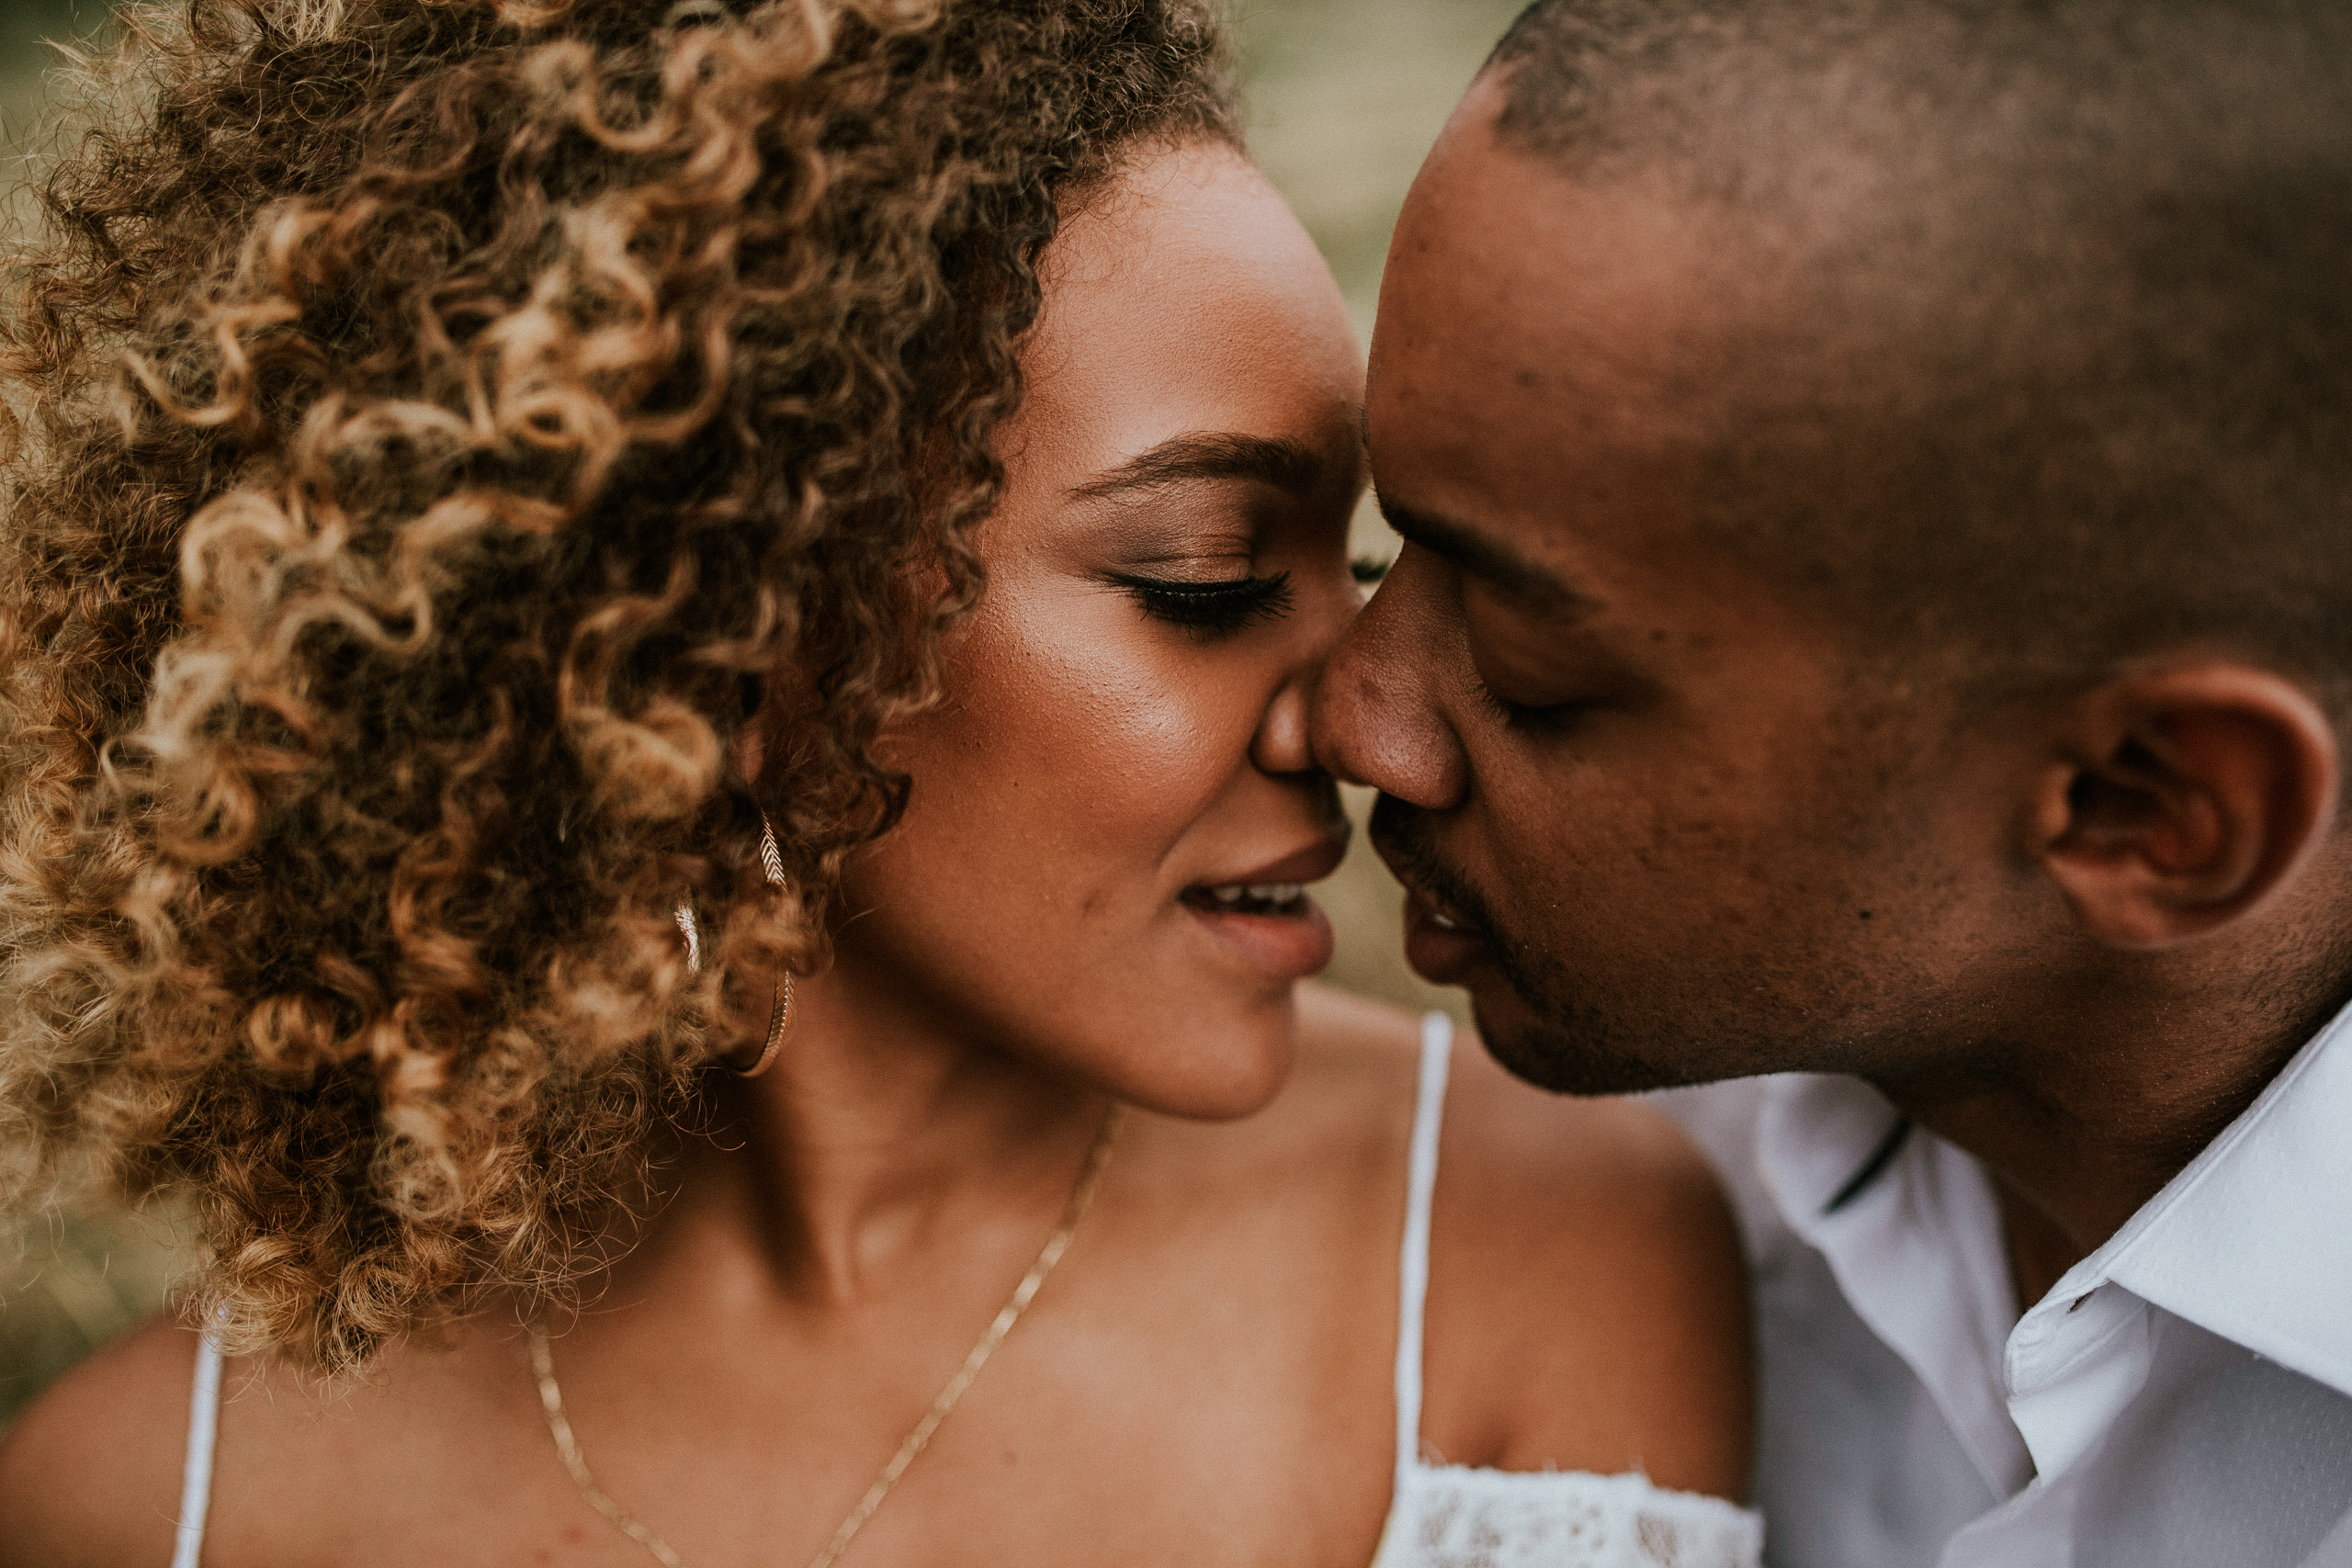 Romantic black couple with curly hair leaning in for a kiss on wedding day intimate moment bride and groom